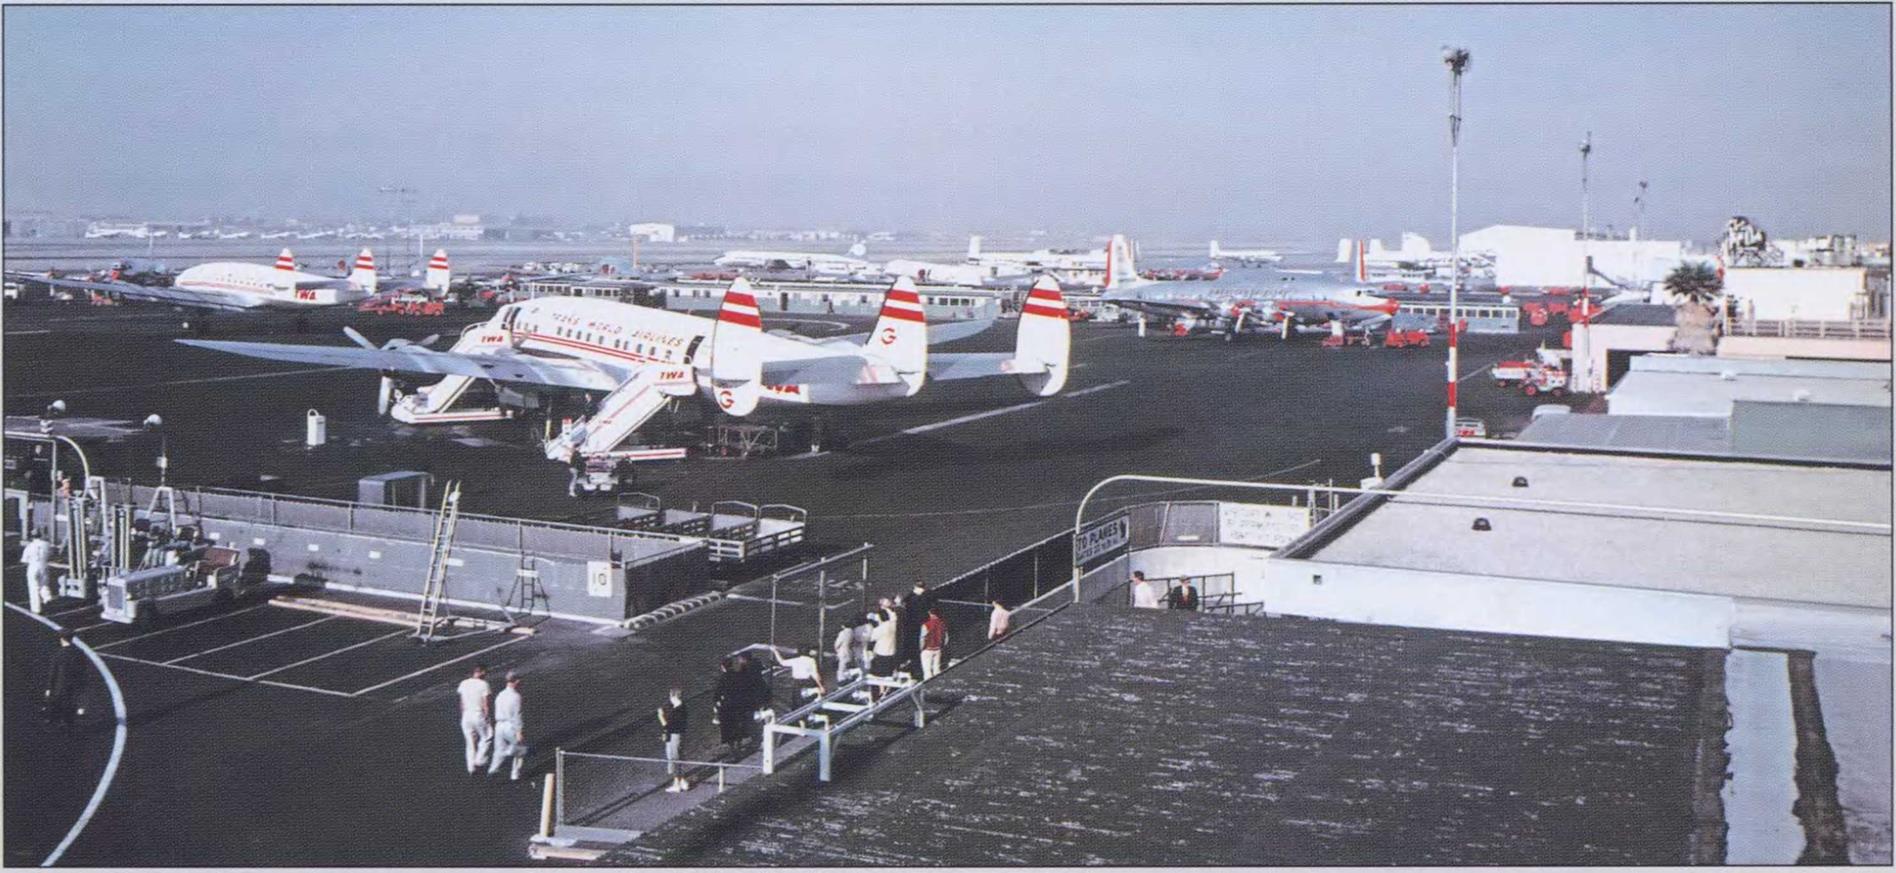 MAJOR U. S. AIRPORTS IN THE 1950s